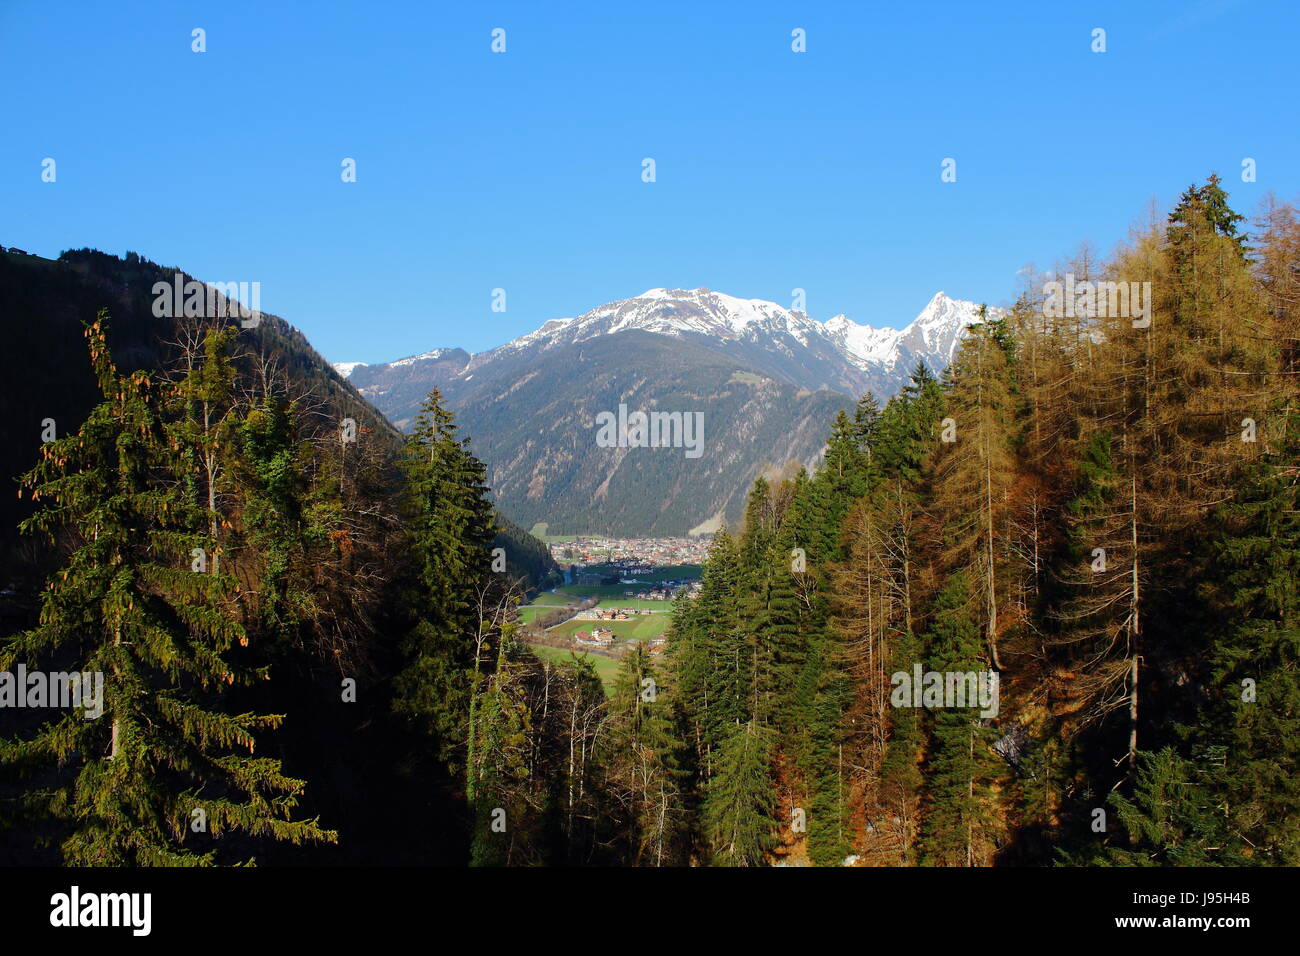 mountains, winter, spring, snow, mountain, forest, nature, mountains, holiday, Stock Photo